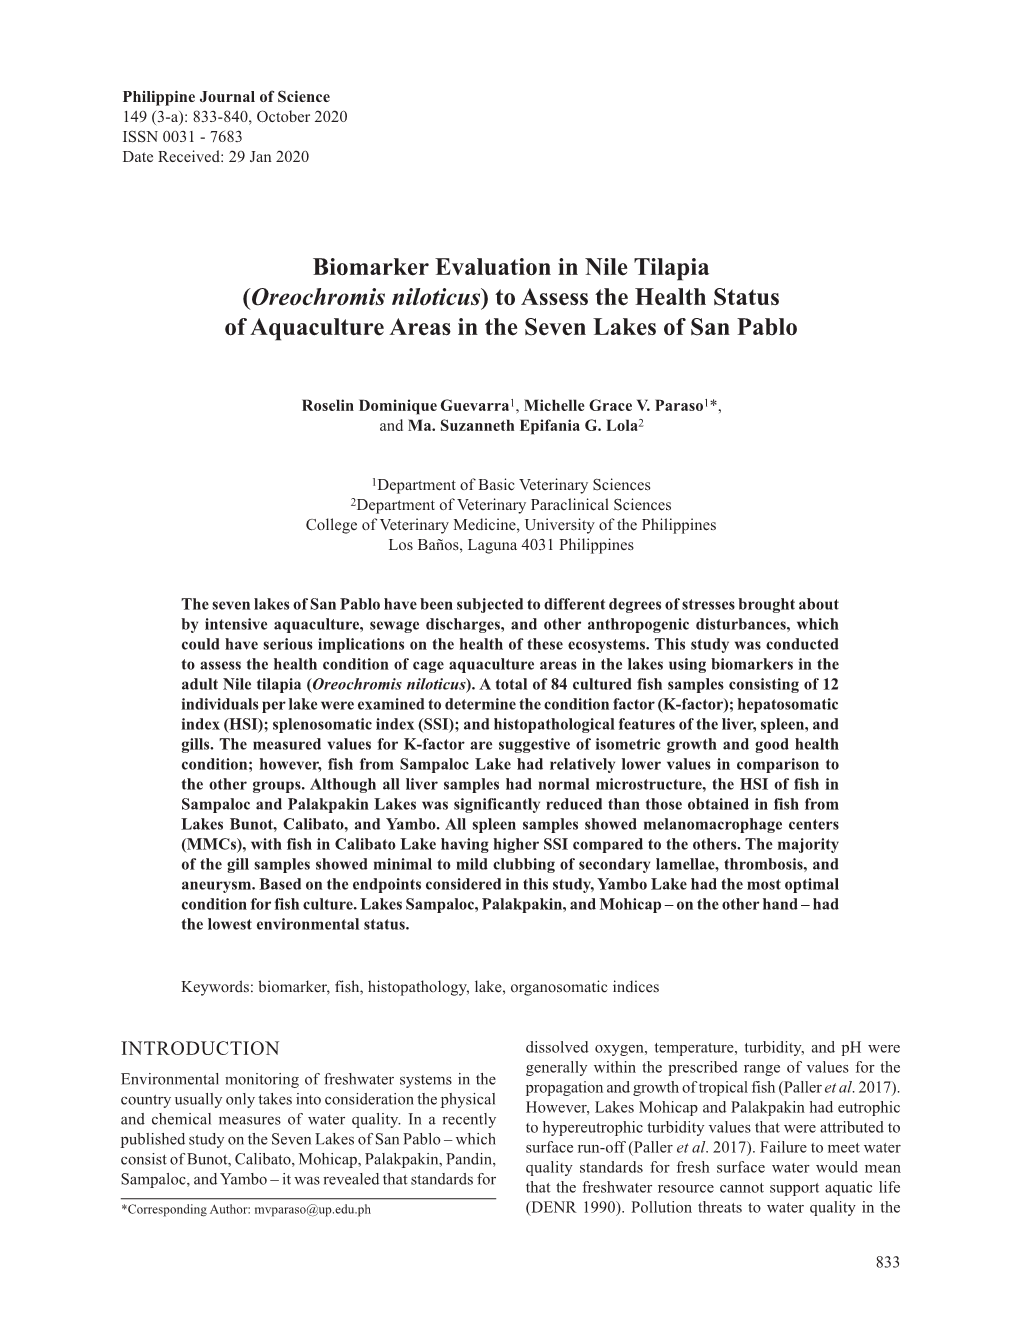 Biomarker Evaluation in Nile Tilapia (Oreochromis Niloticus) to Assess the Health Status of Aquaculture Areas in the Seven Lakes of San Pablo